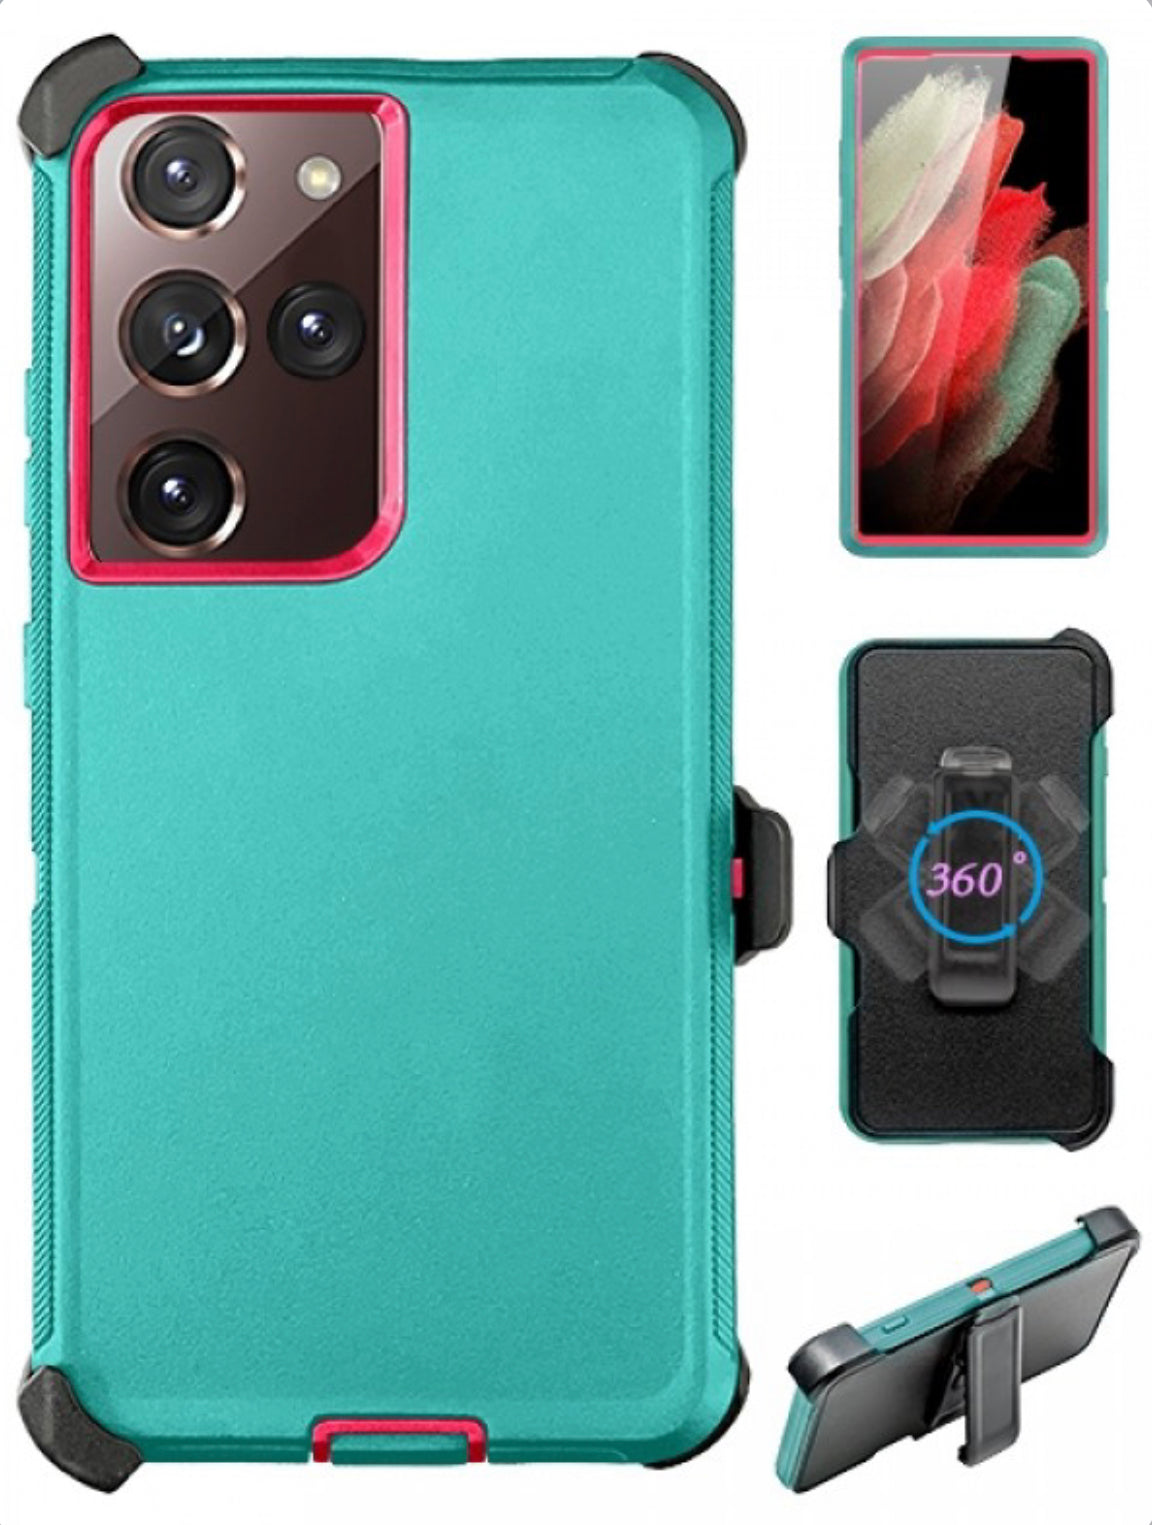 Heavy Duty Shockproof Case for Galaxy S21 Ultra - Light Teal/Hot Pink